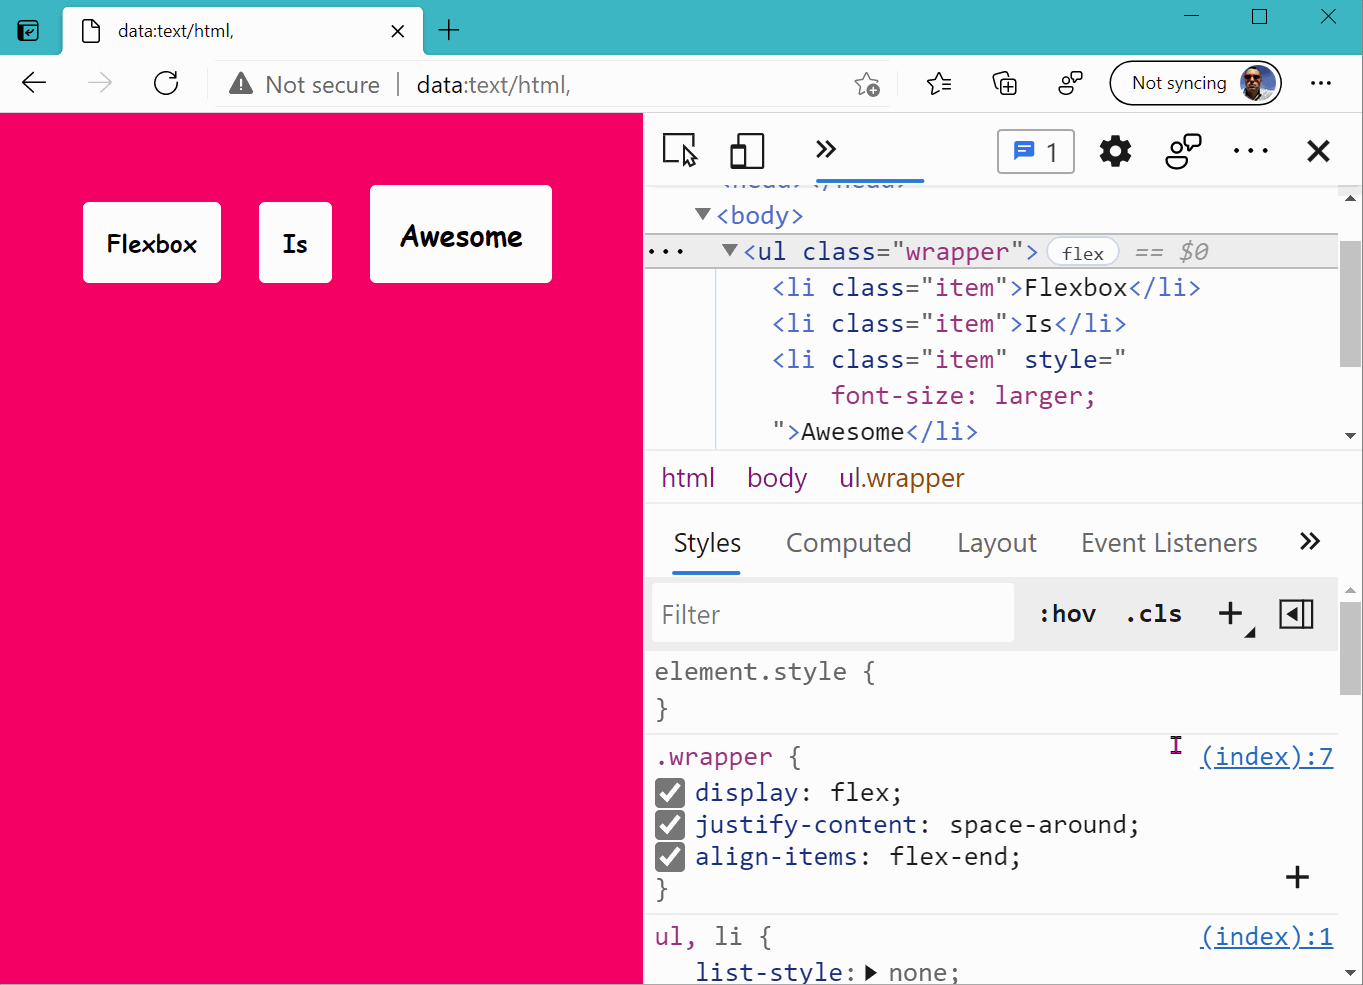 Gif animation showing how hovering over properties in the Styles pane highlight the corresponding parts of the page